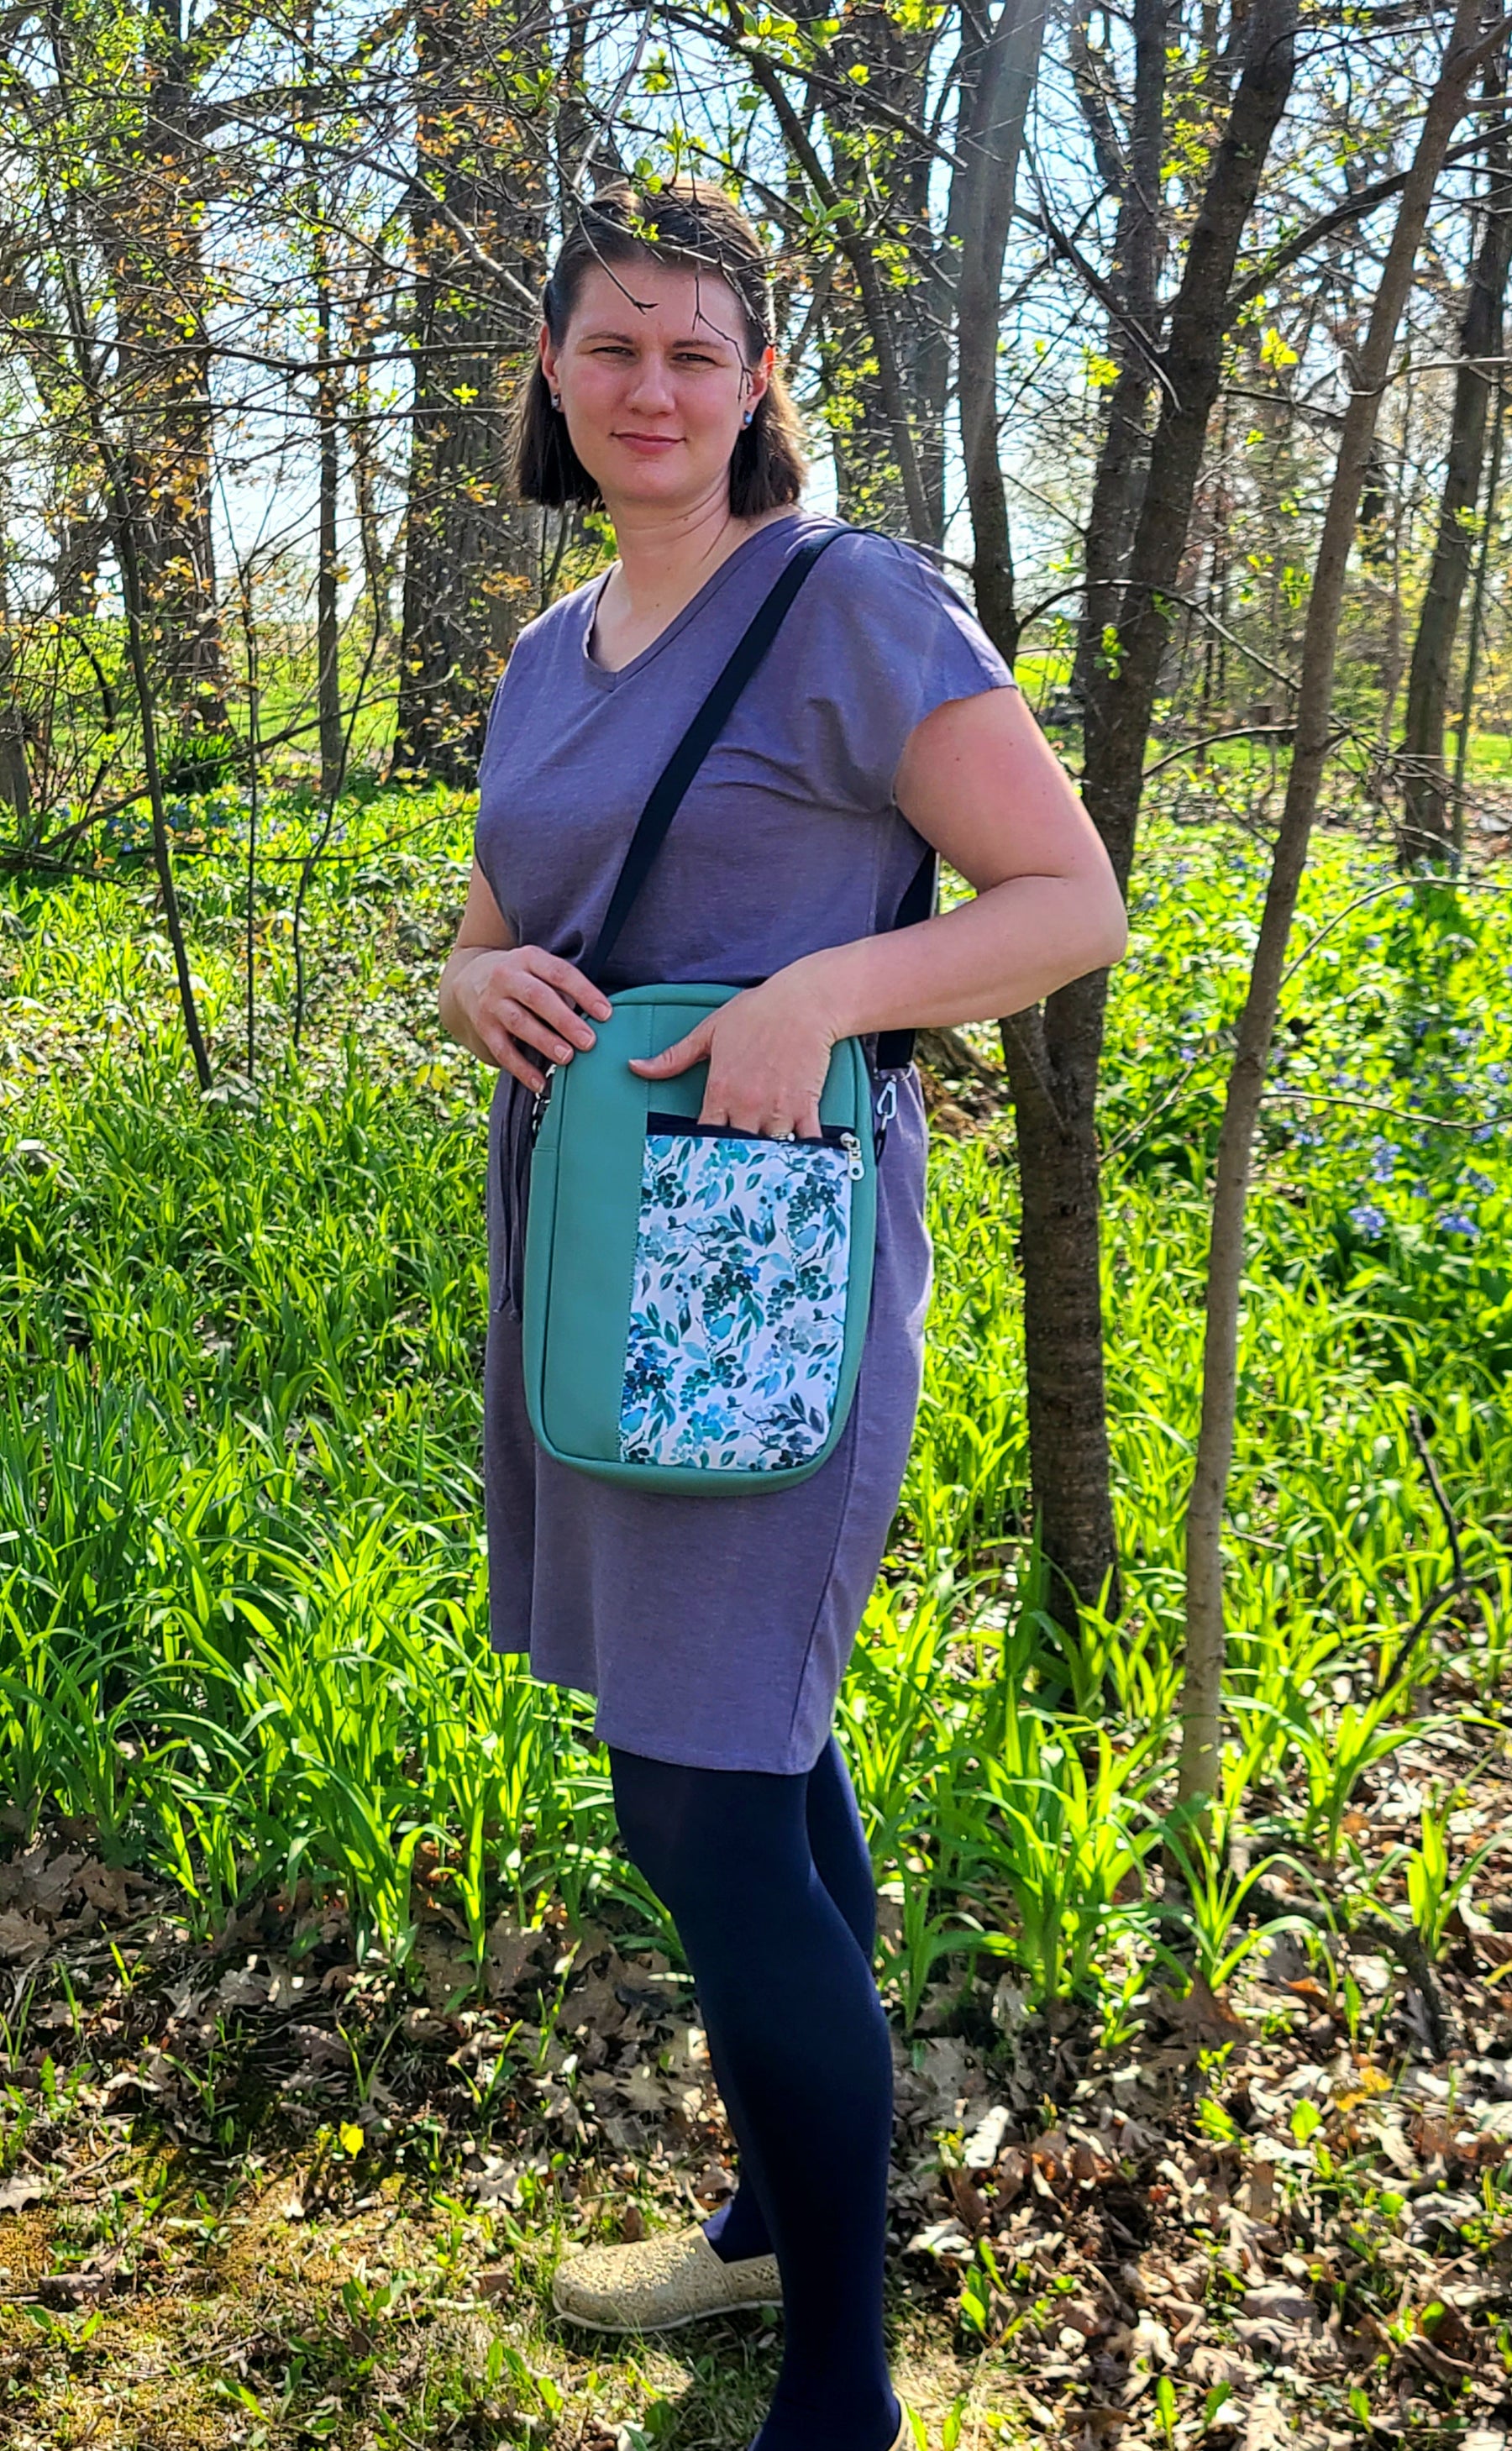 Convertible Backpack sewing pattern - Sew Modern Bags